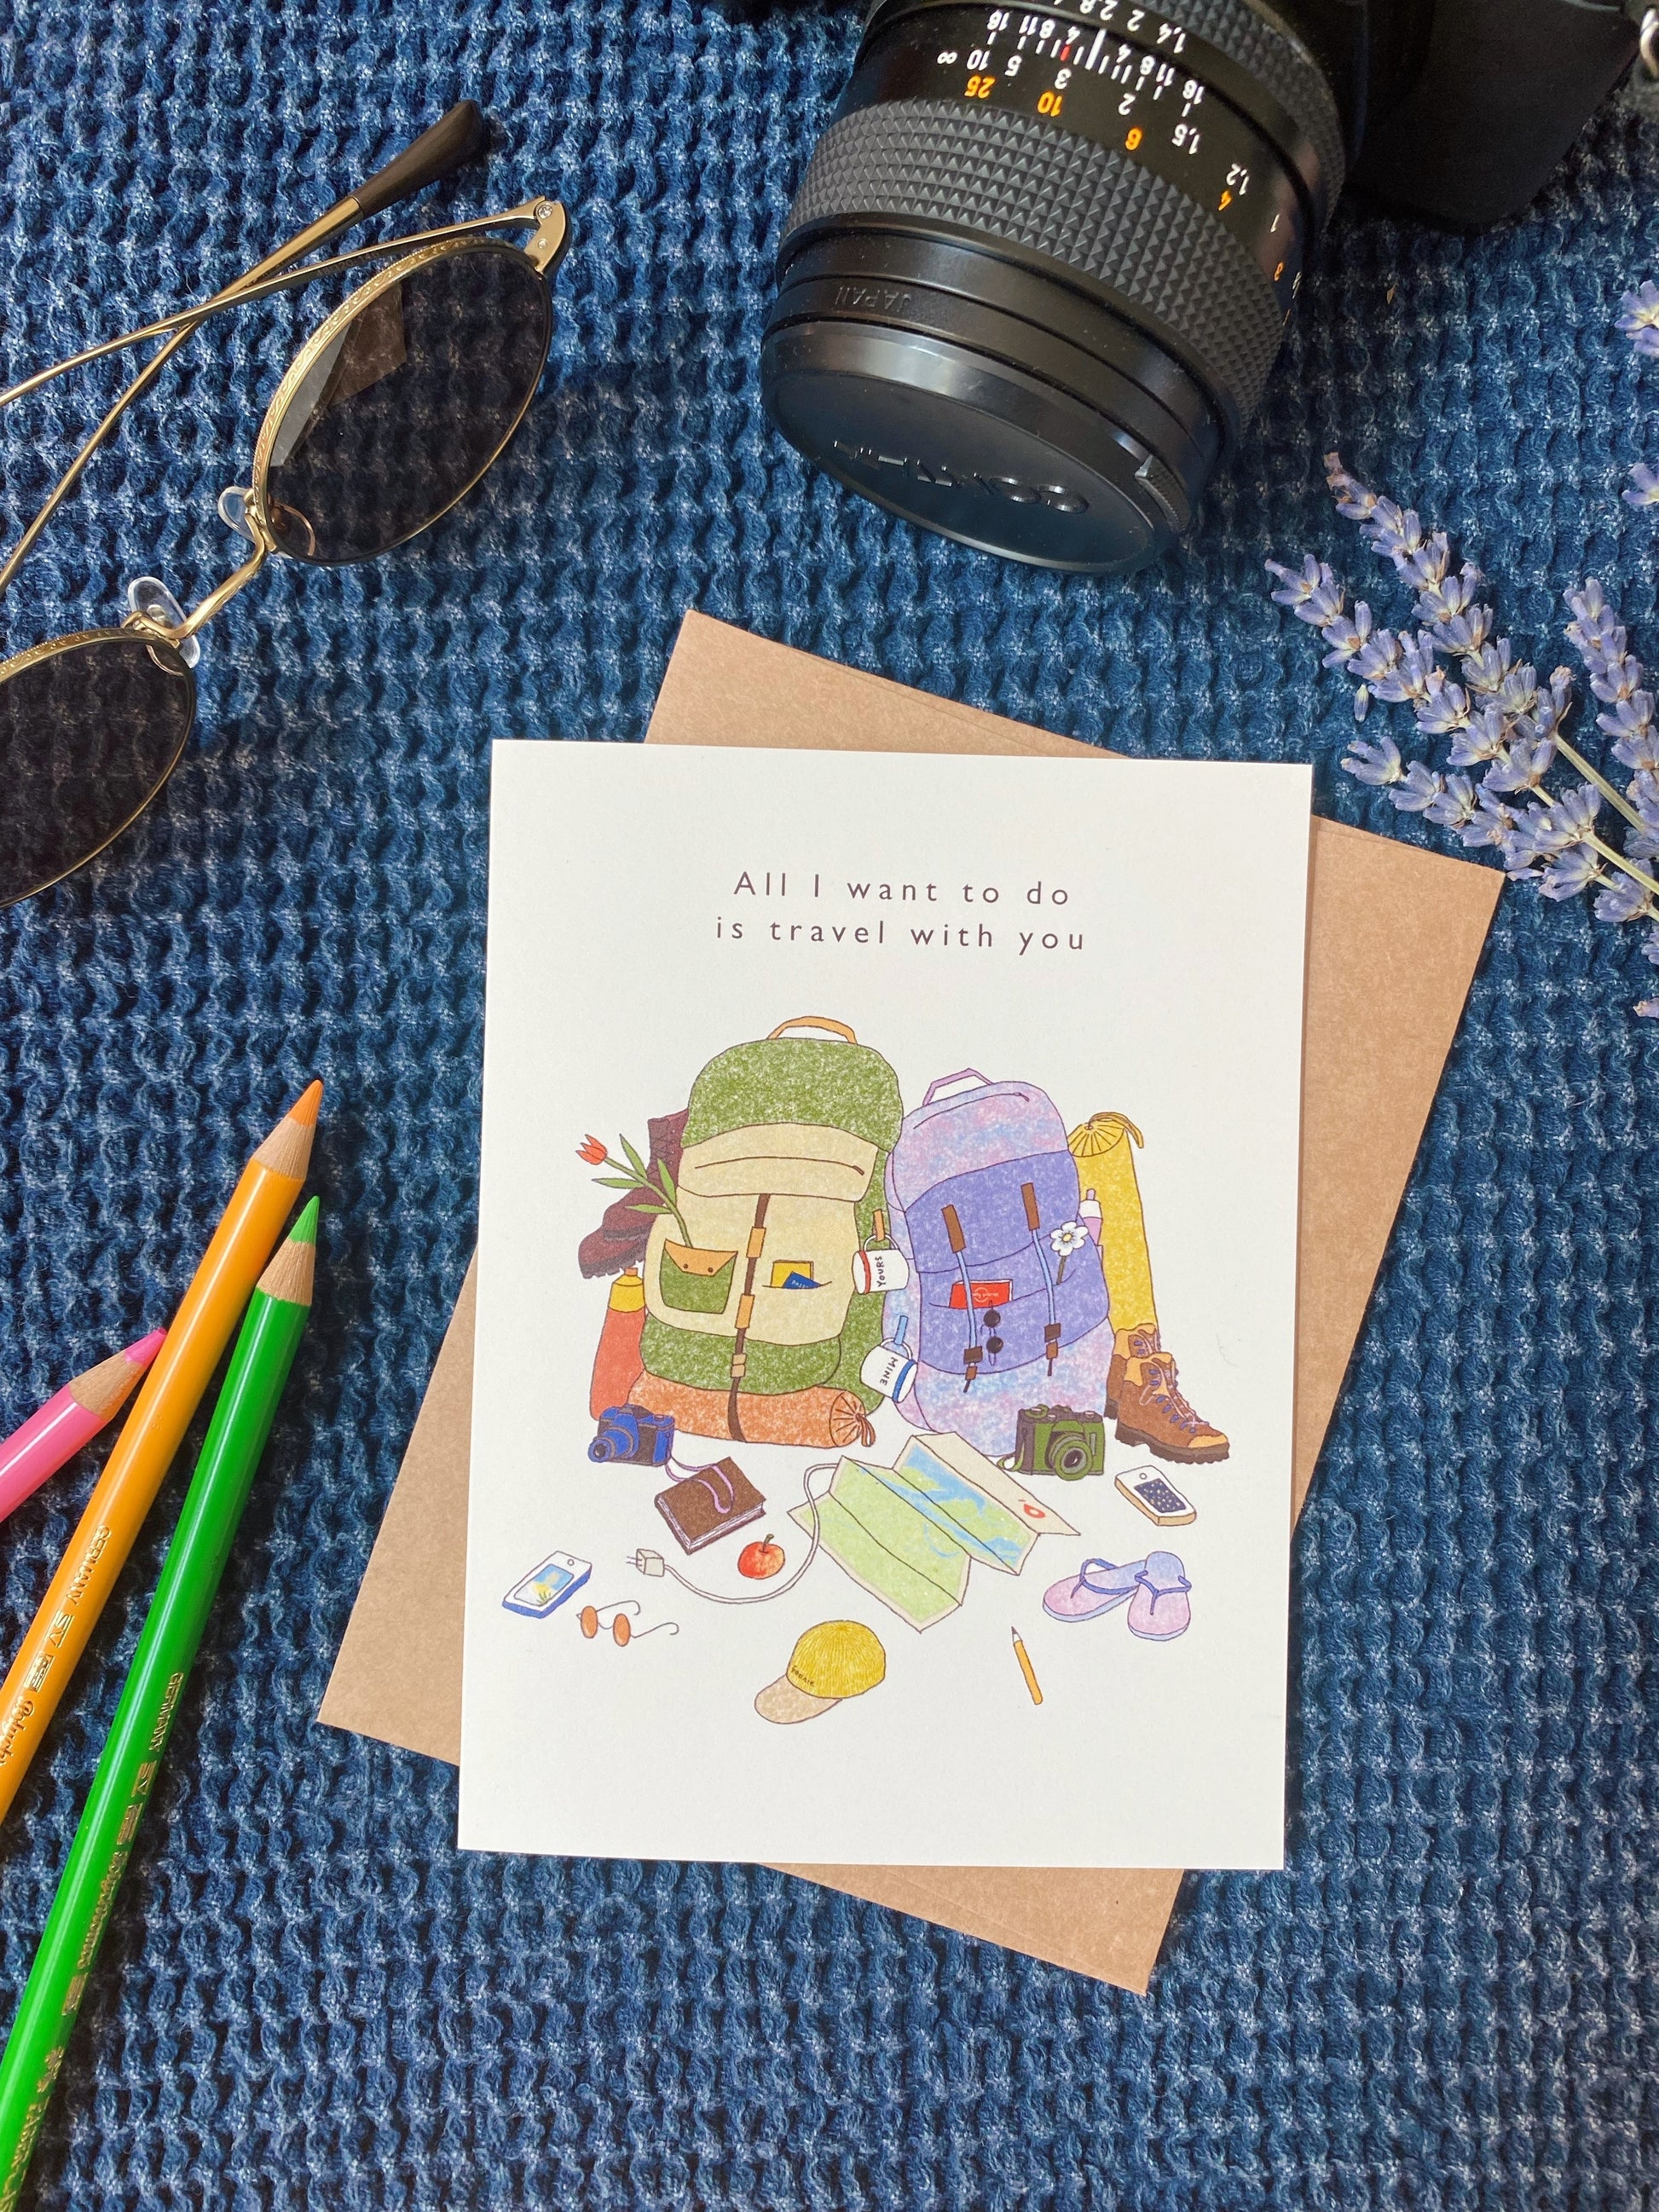 Just because Card that says “All I want to do is travel with you” with the illustration of two backpacks and travelling goods such as maps, sunglasses, books, yoga mats, phones, and beach sandals. 